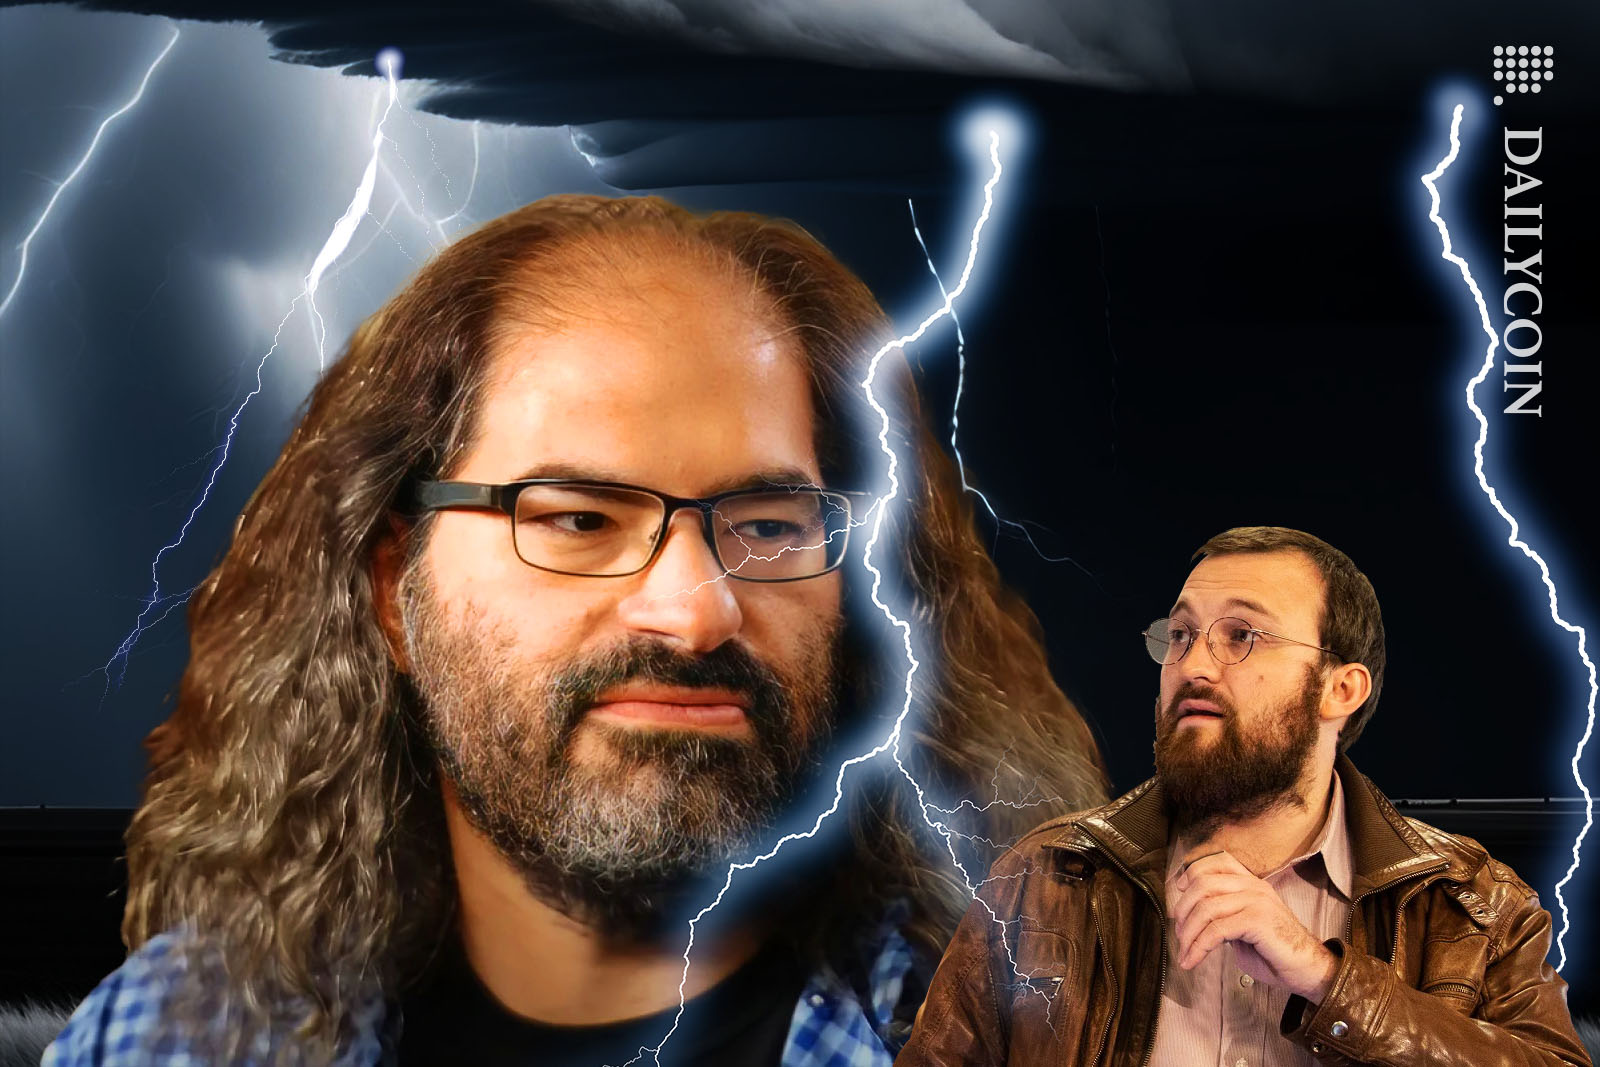 David Schwartz and Charles Hoskinson staring at eachother in a storm.